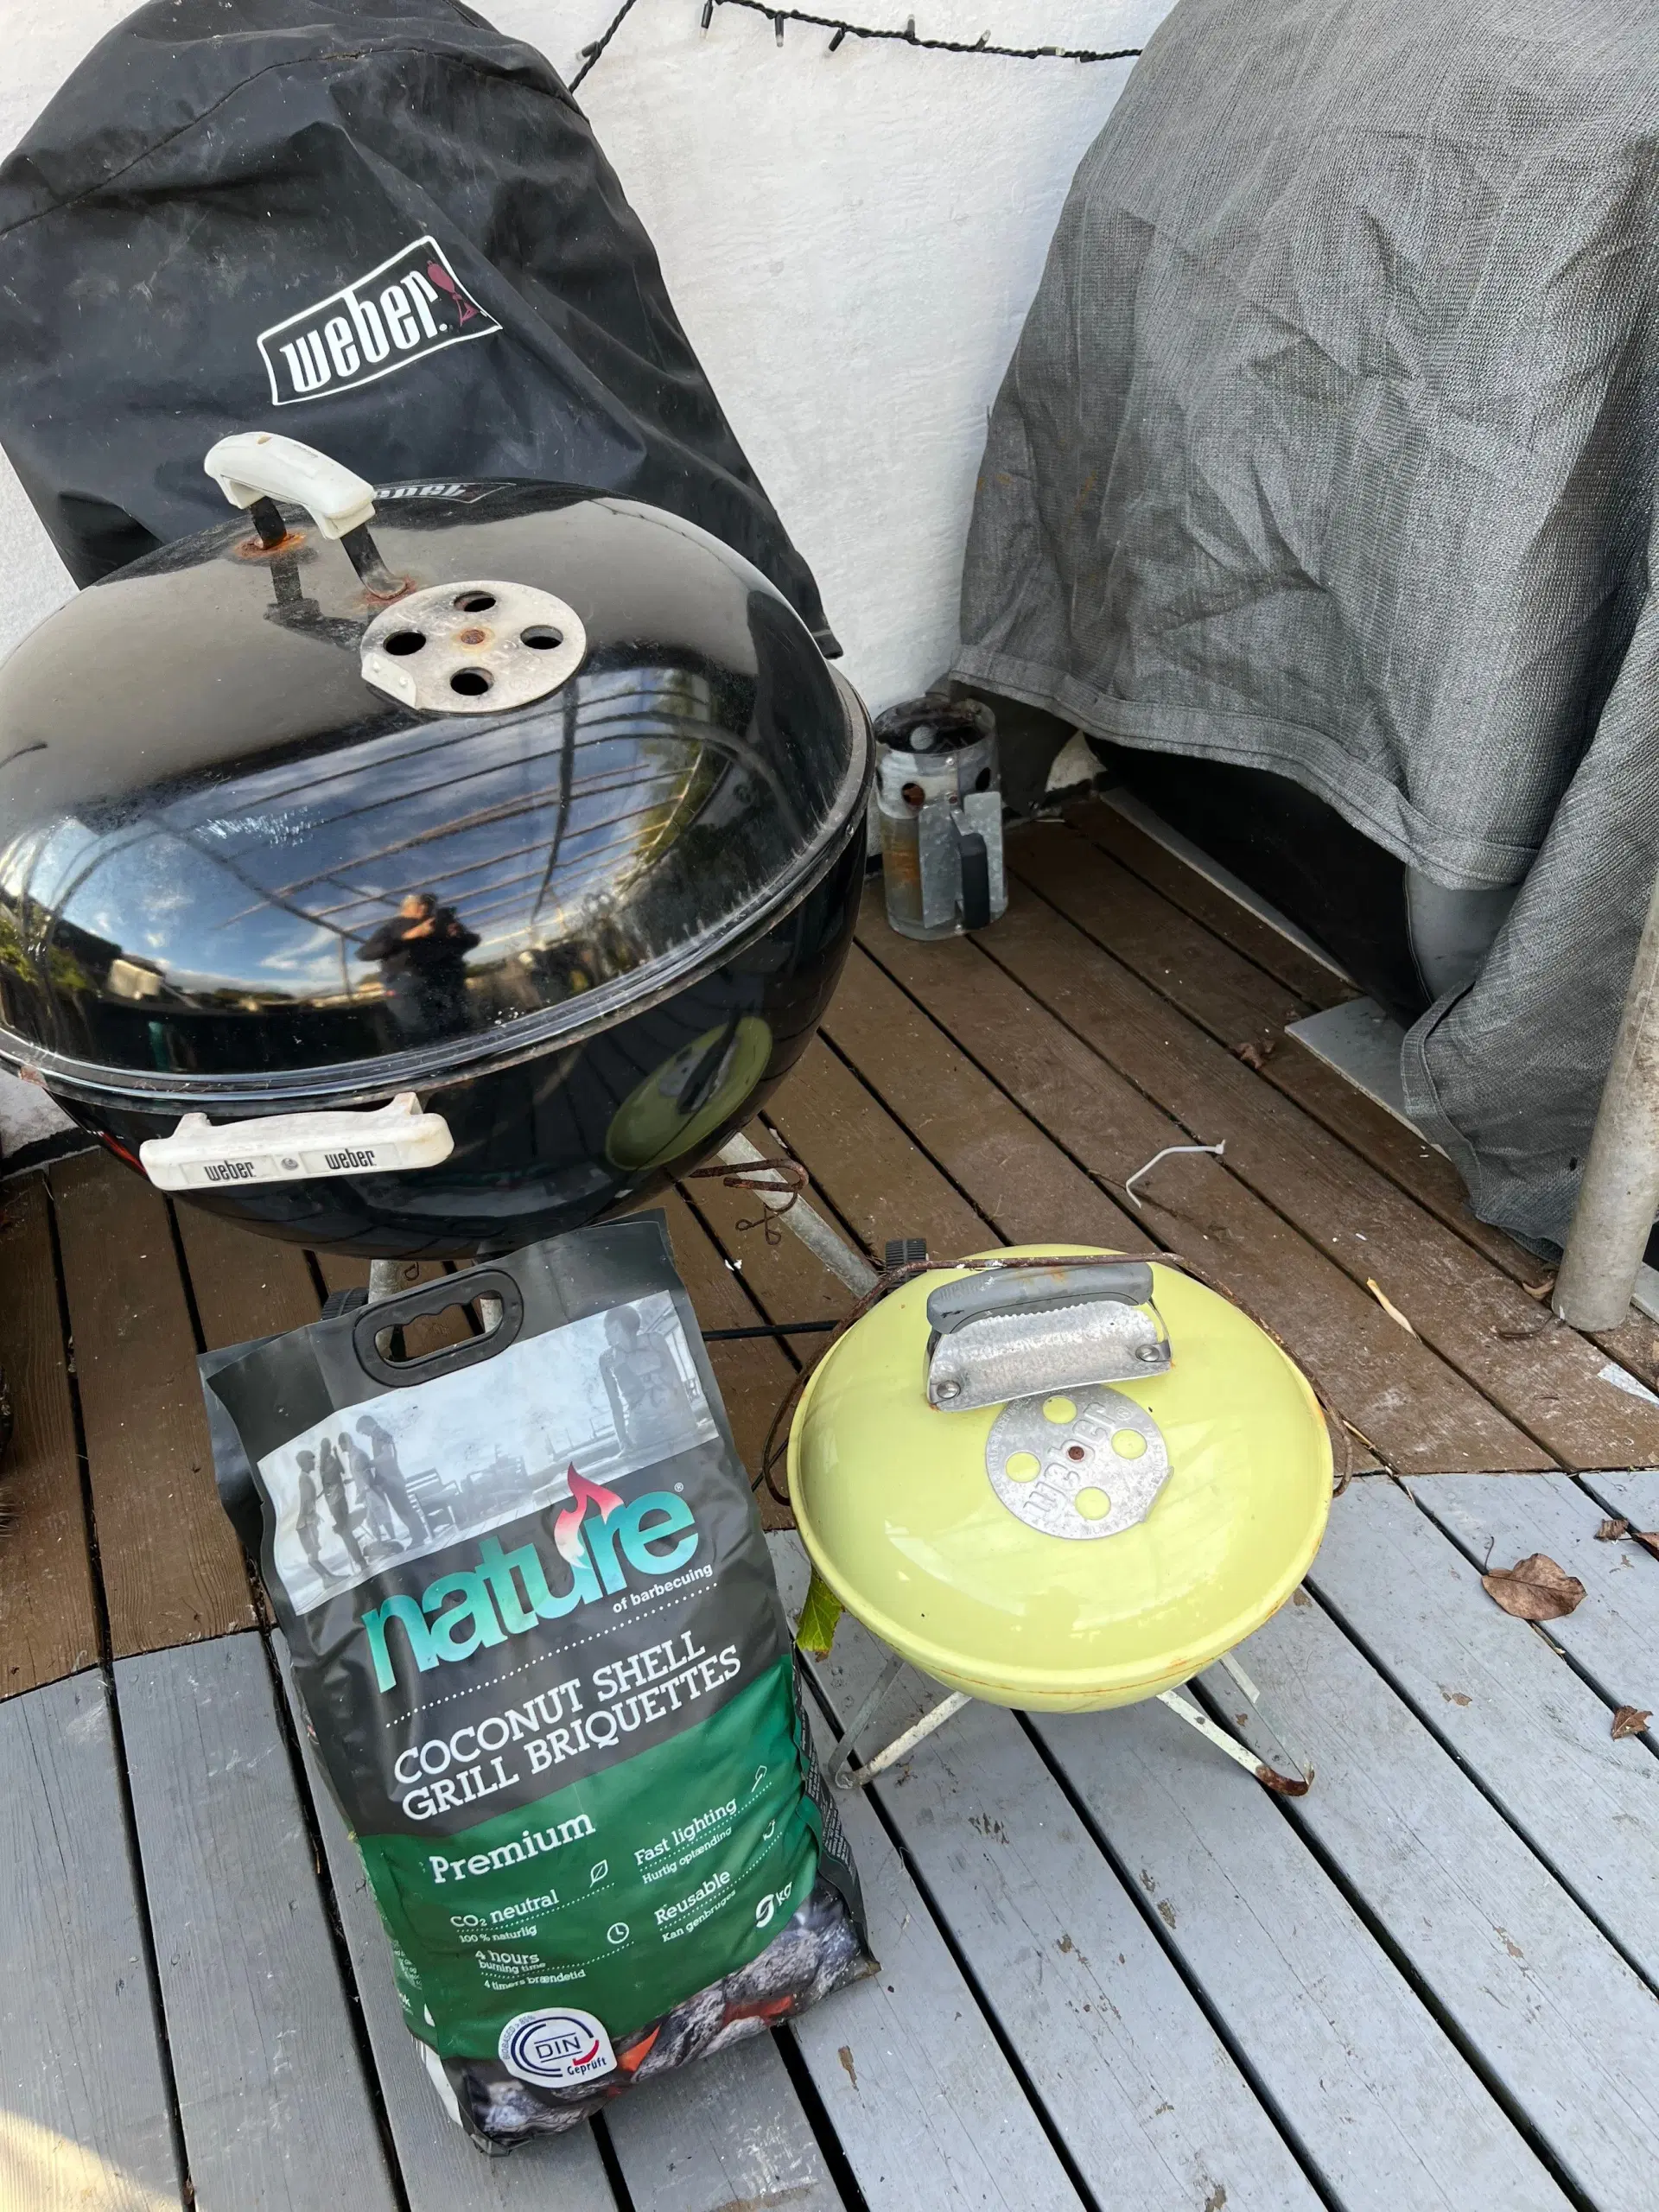 Weber grill?